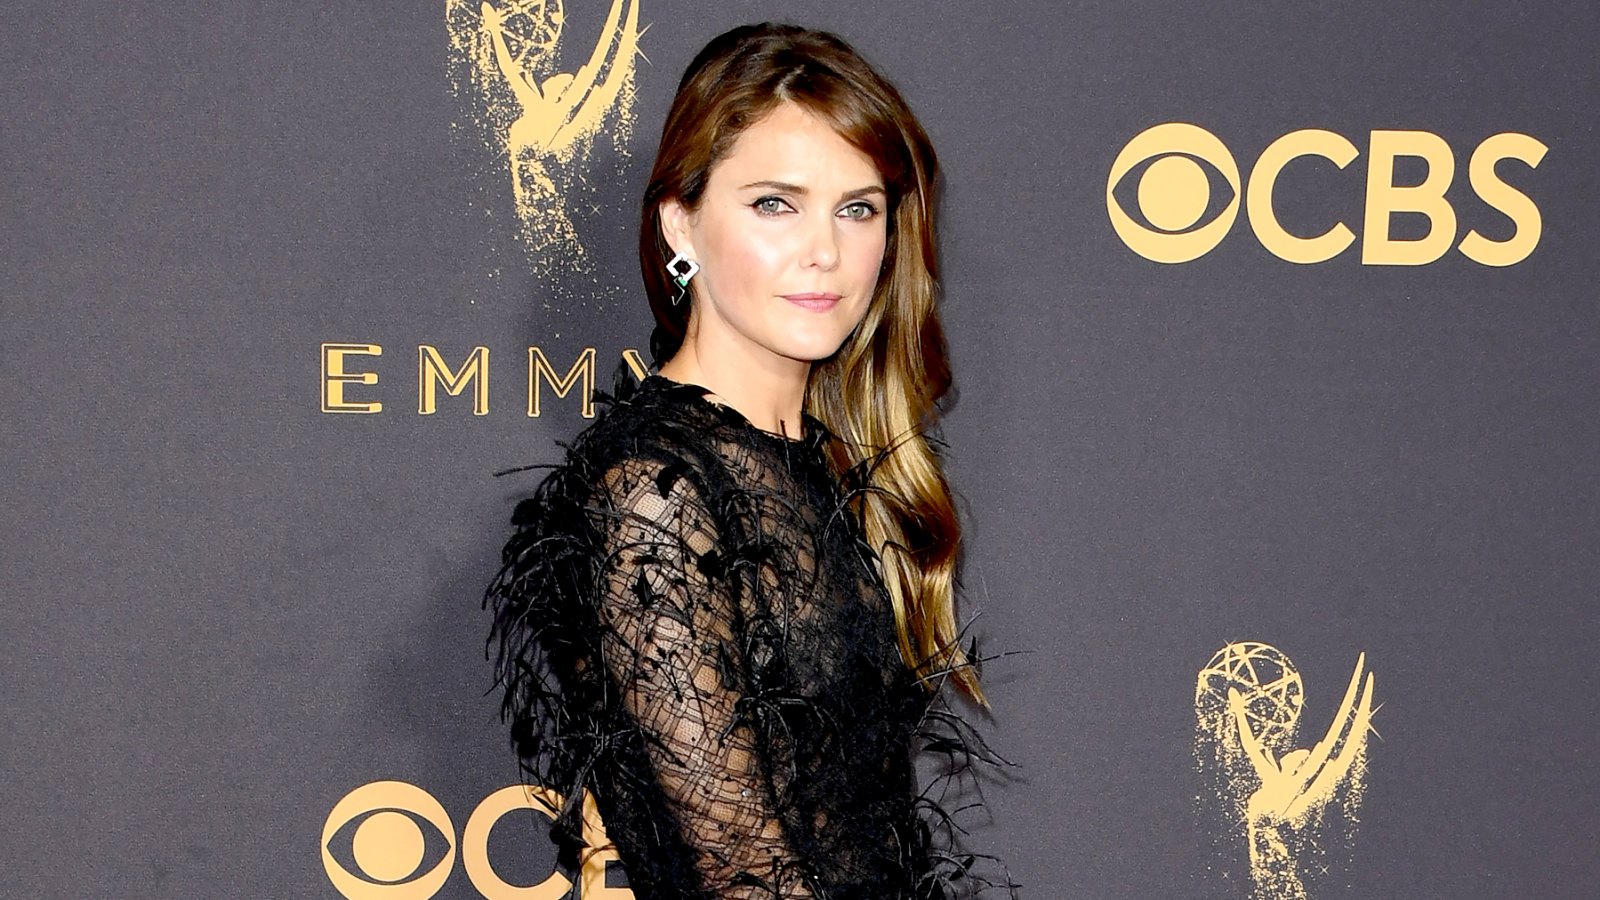 Keri Russell arrives for the 69th Emmy Awards at the Microsoft Theatre on September 17, 2017 in Los Angeles, California.